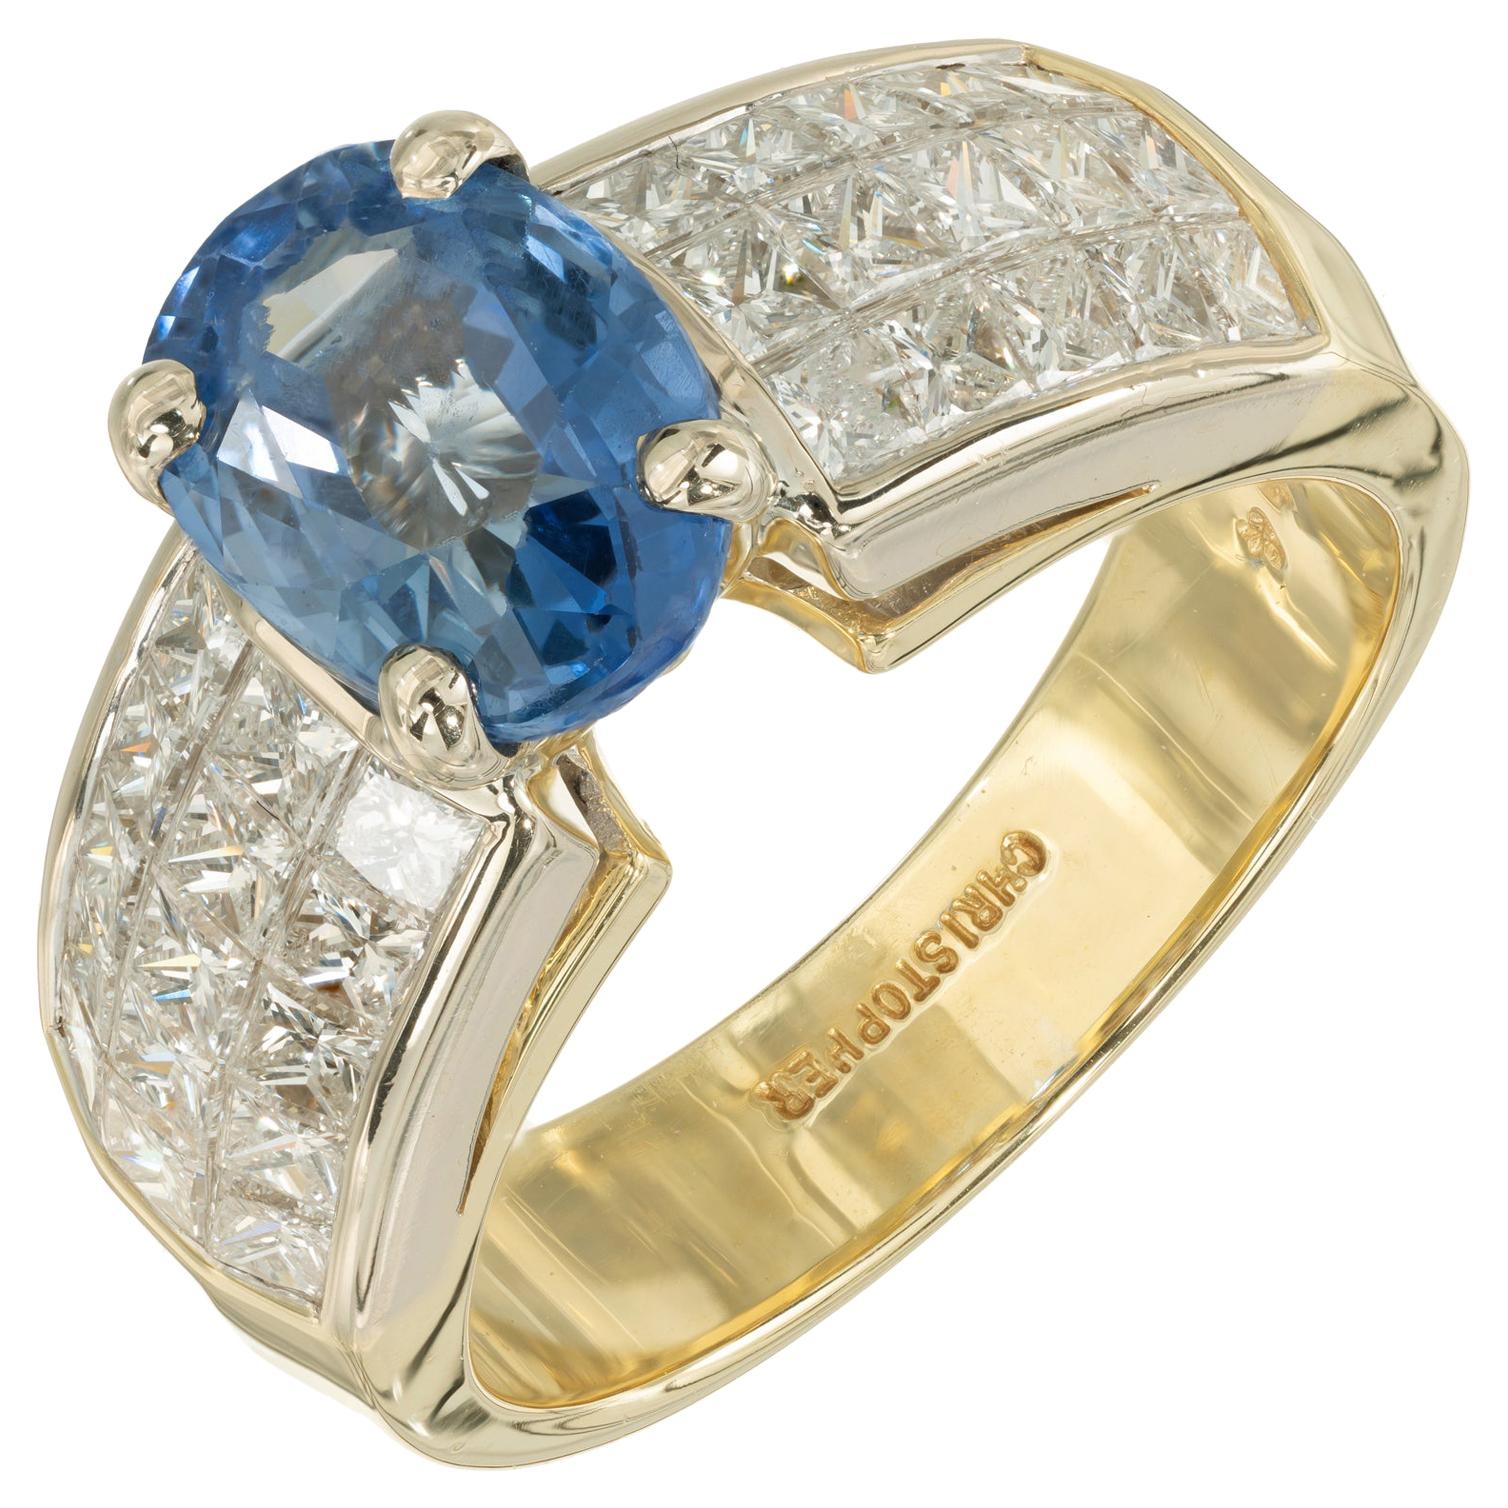 Christopher Designs GIA Certified 2.38 Carat Sapphire Diamond Gold Ring